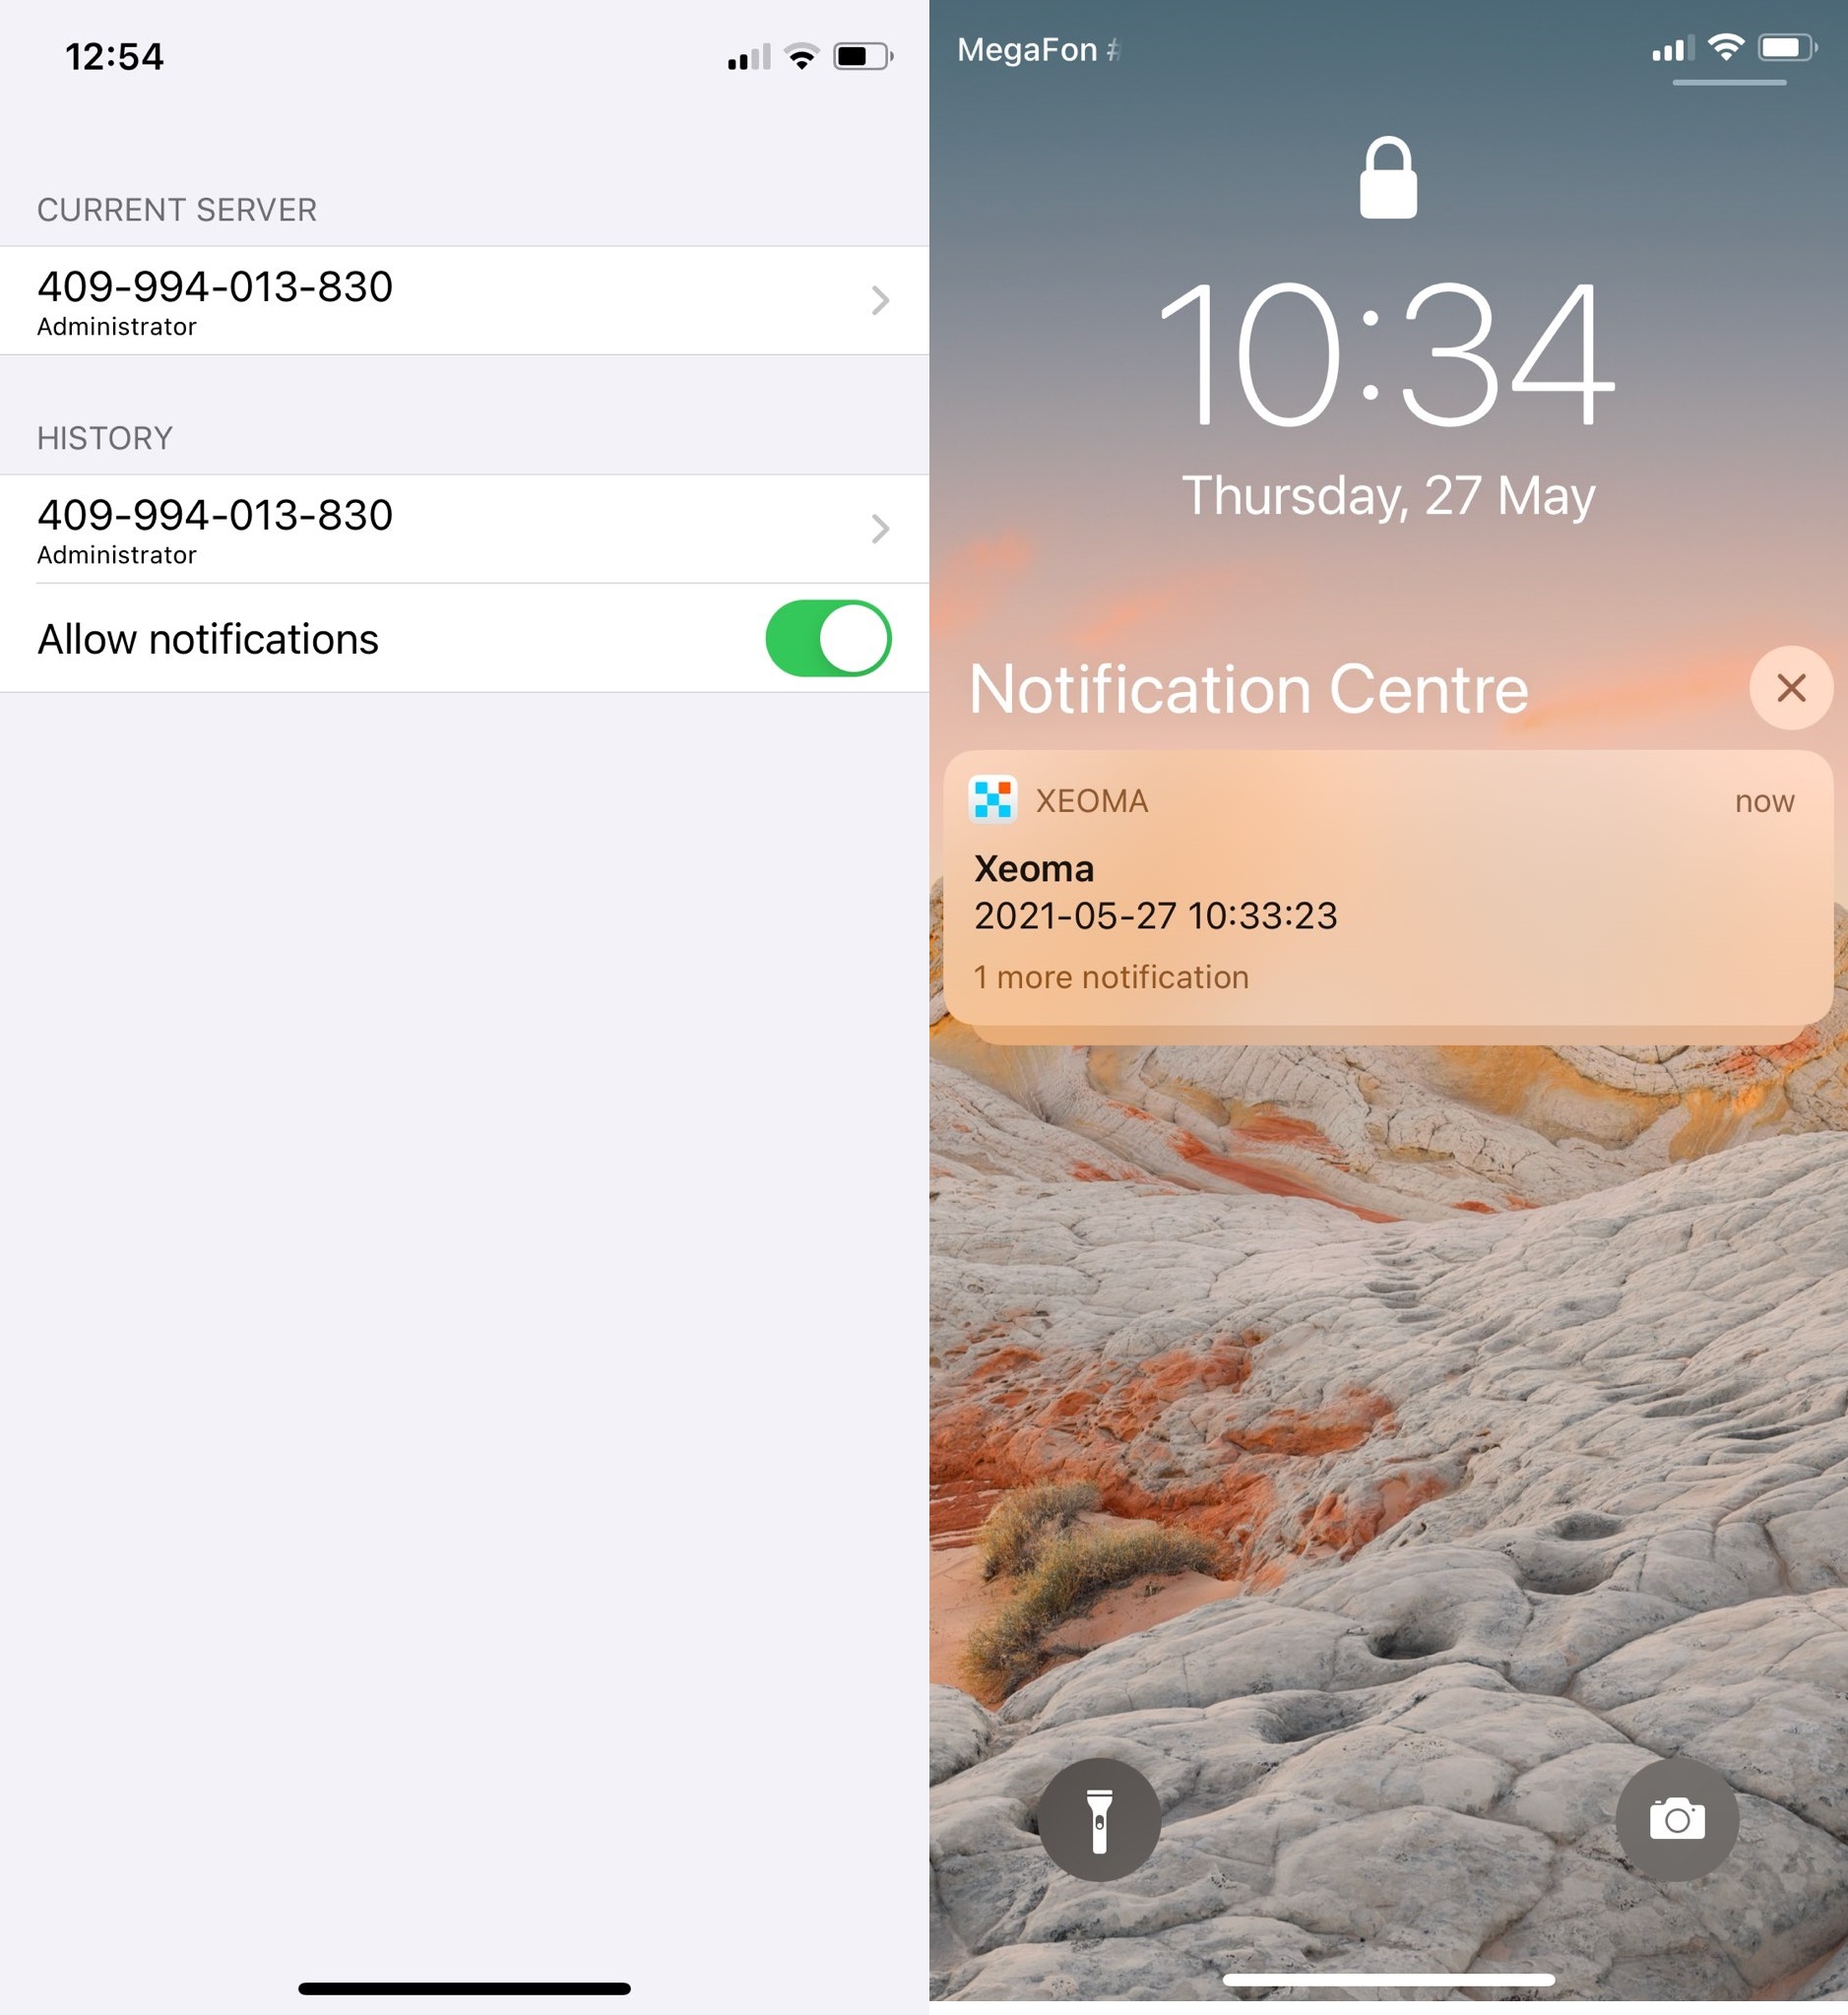 Mobile notifications on iOS devices. Real-time immediate notifications.